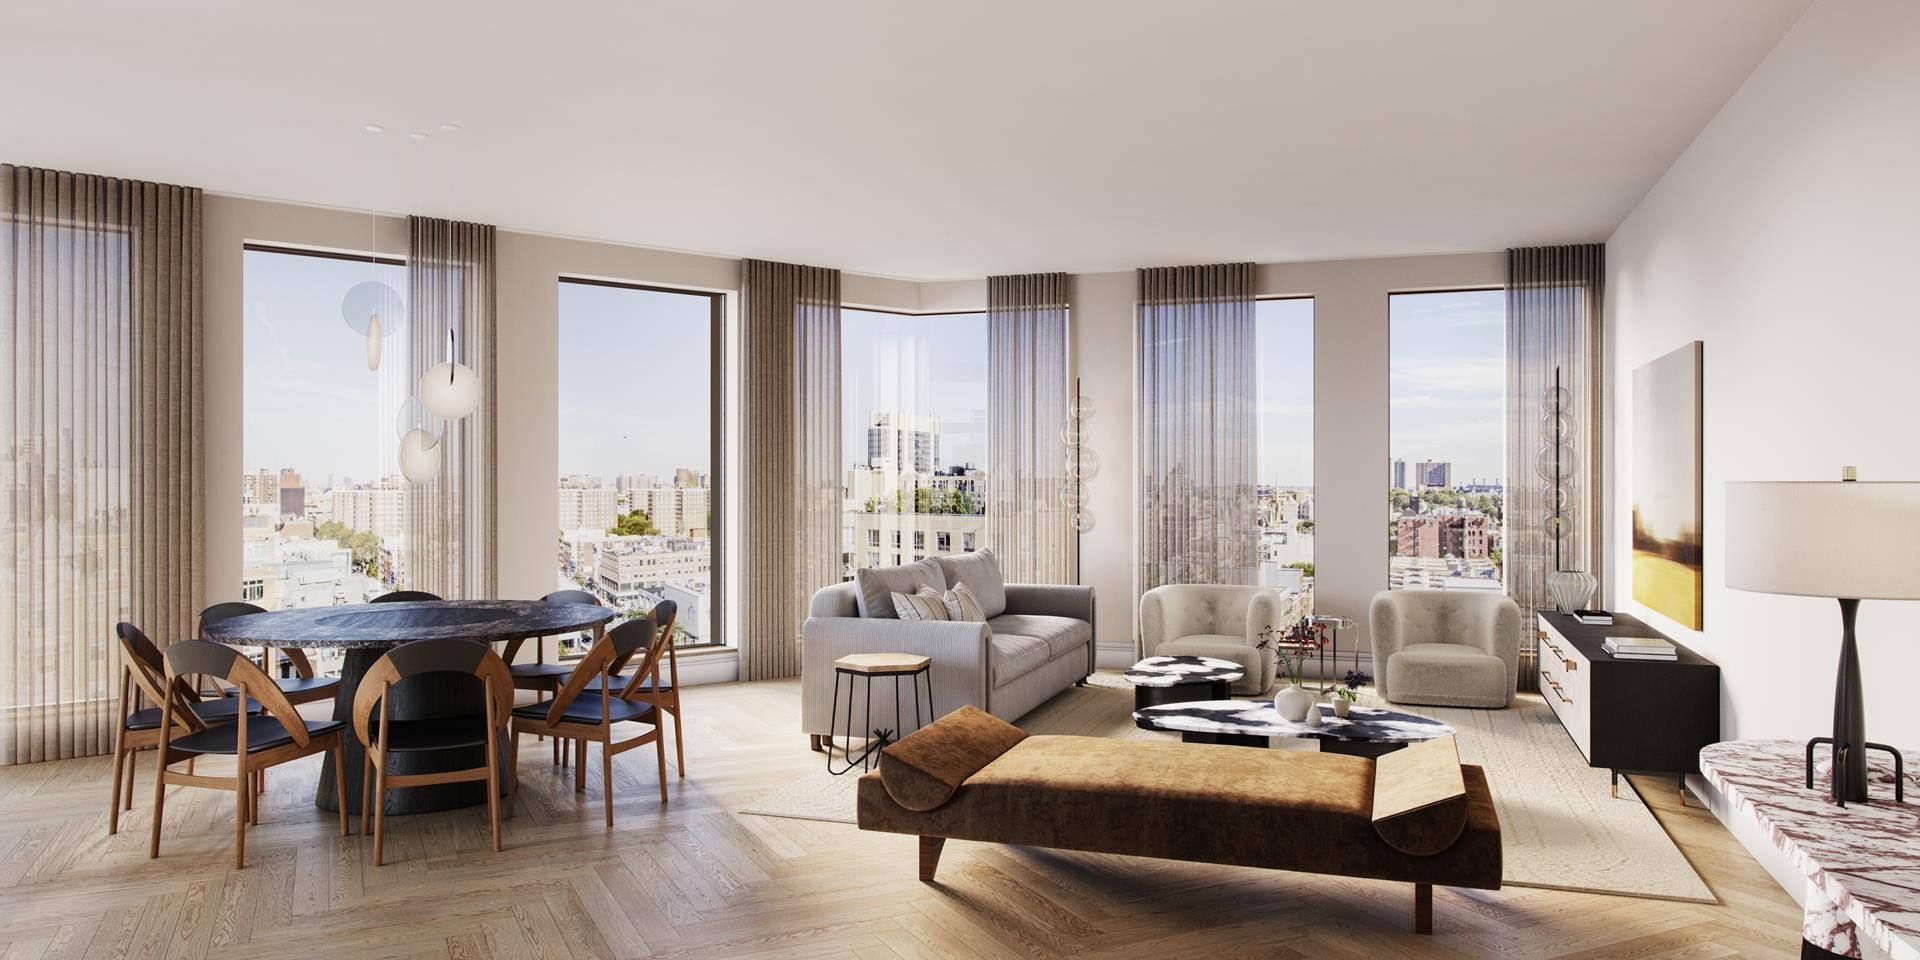 Sales Gallery Now Open By Appointment Introducing the immaculate residence PH D at 300 West, an 1, 800 square foot double exposure four bedroom, three bathroom, offering extensive living dining ...